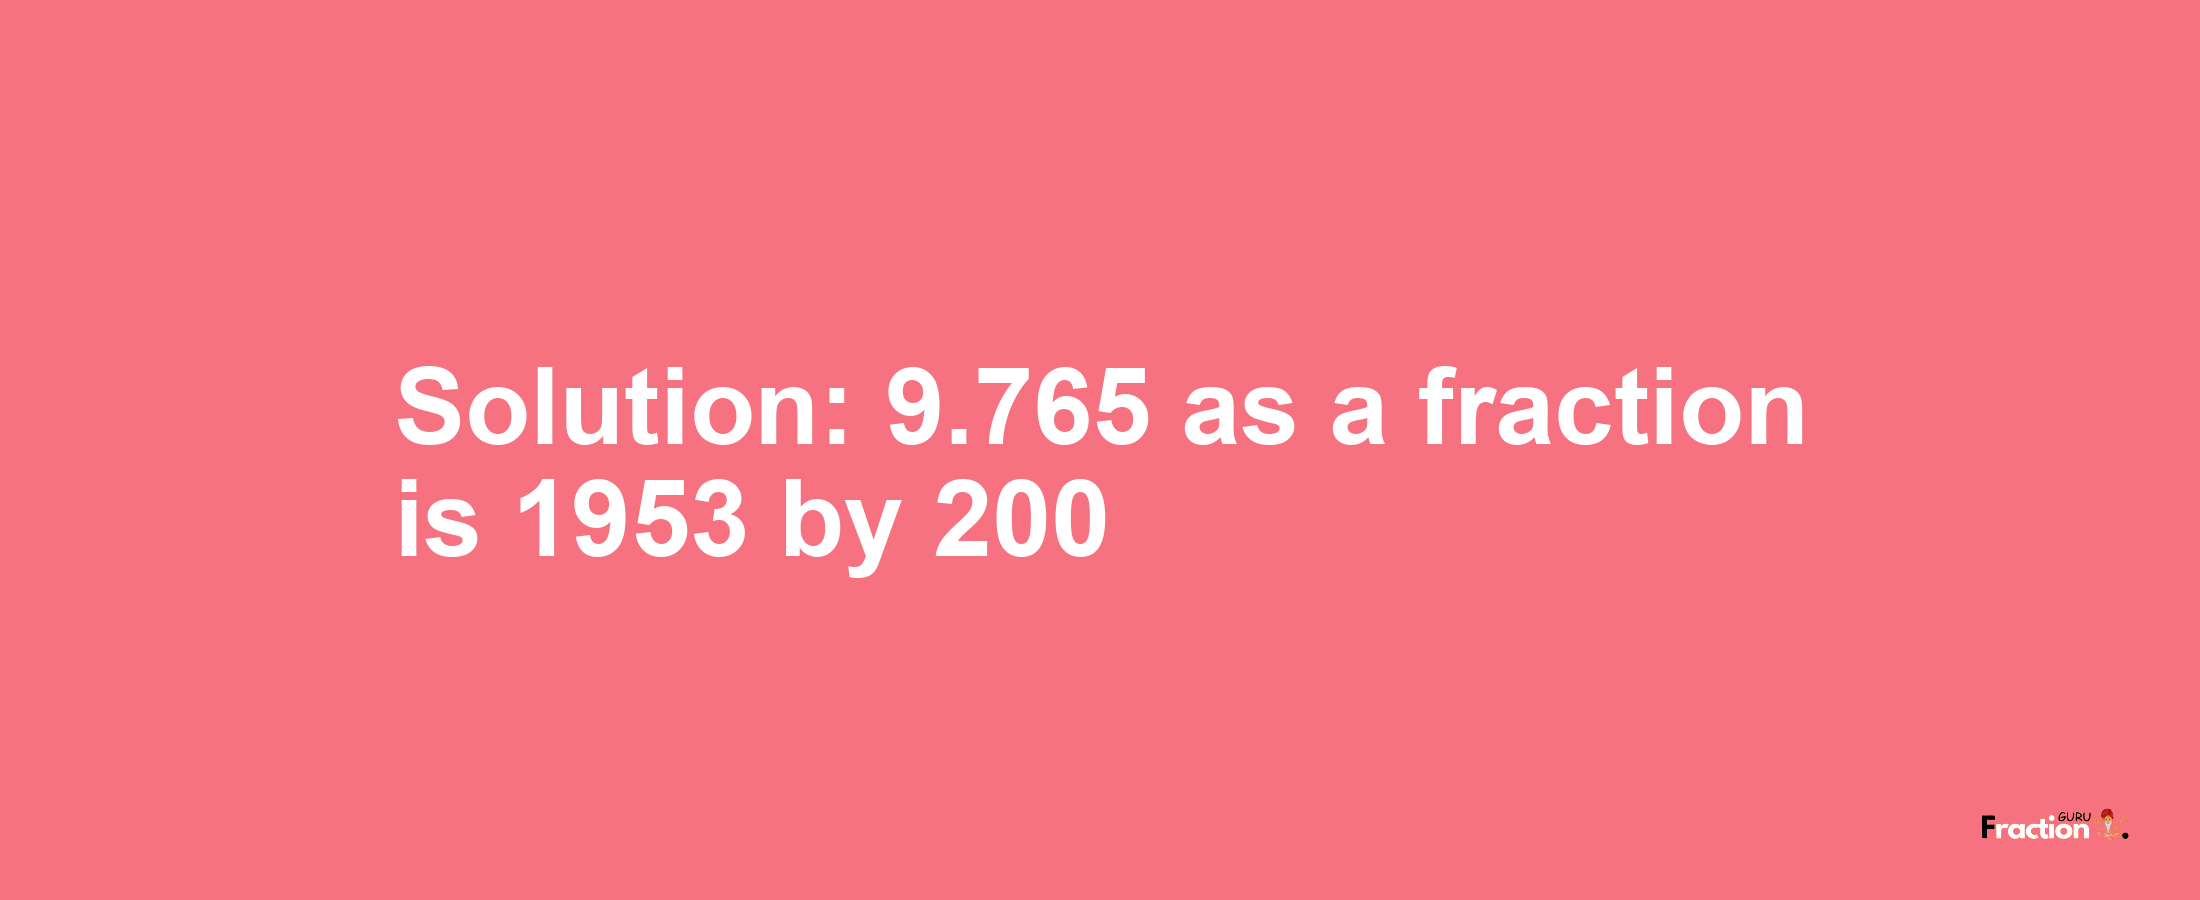 Solution:9.765 as a fraction is 1953/200